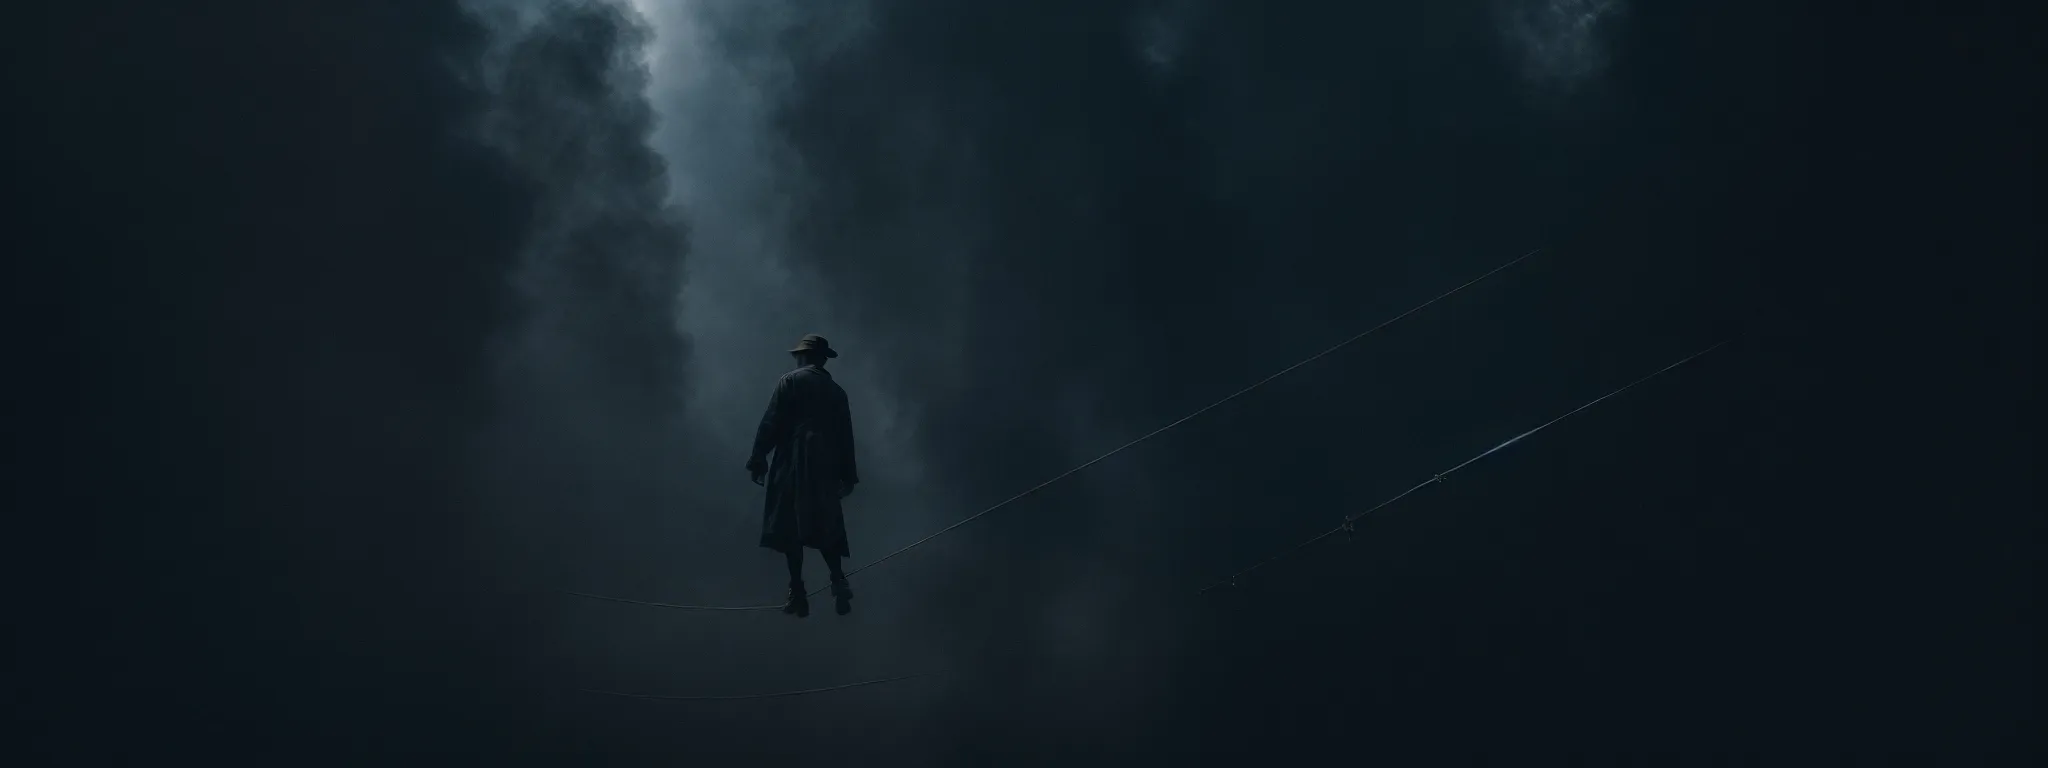 a shadowy figure carefully navigates a tightrope above a digital abyss, highlighting the precarious nature of cloaking strategies.